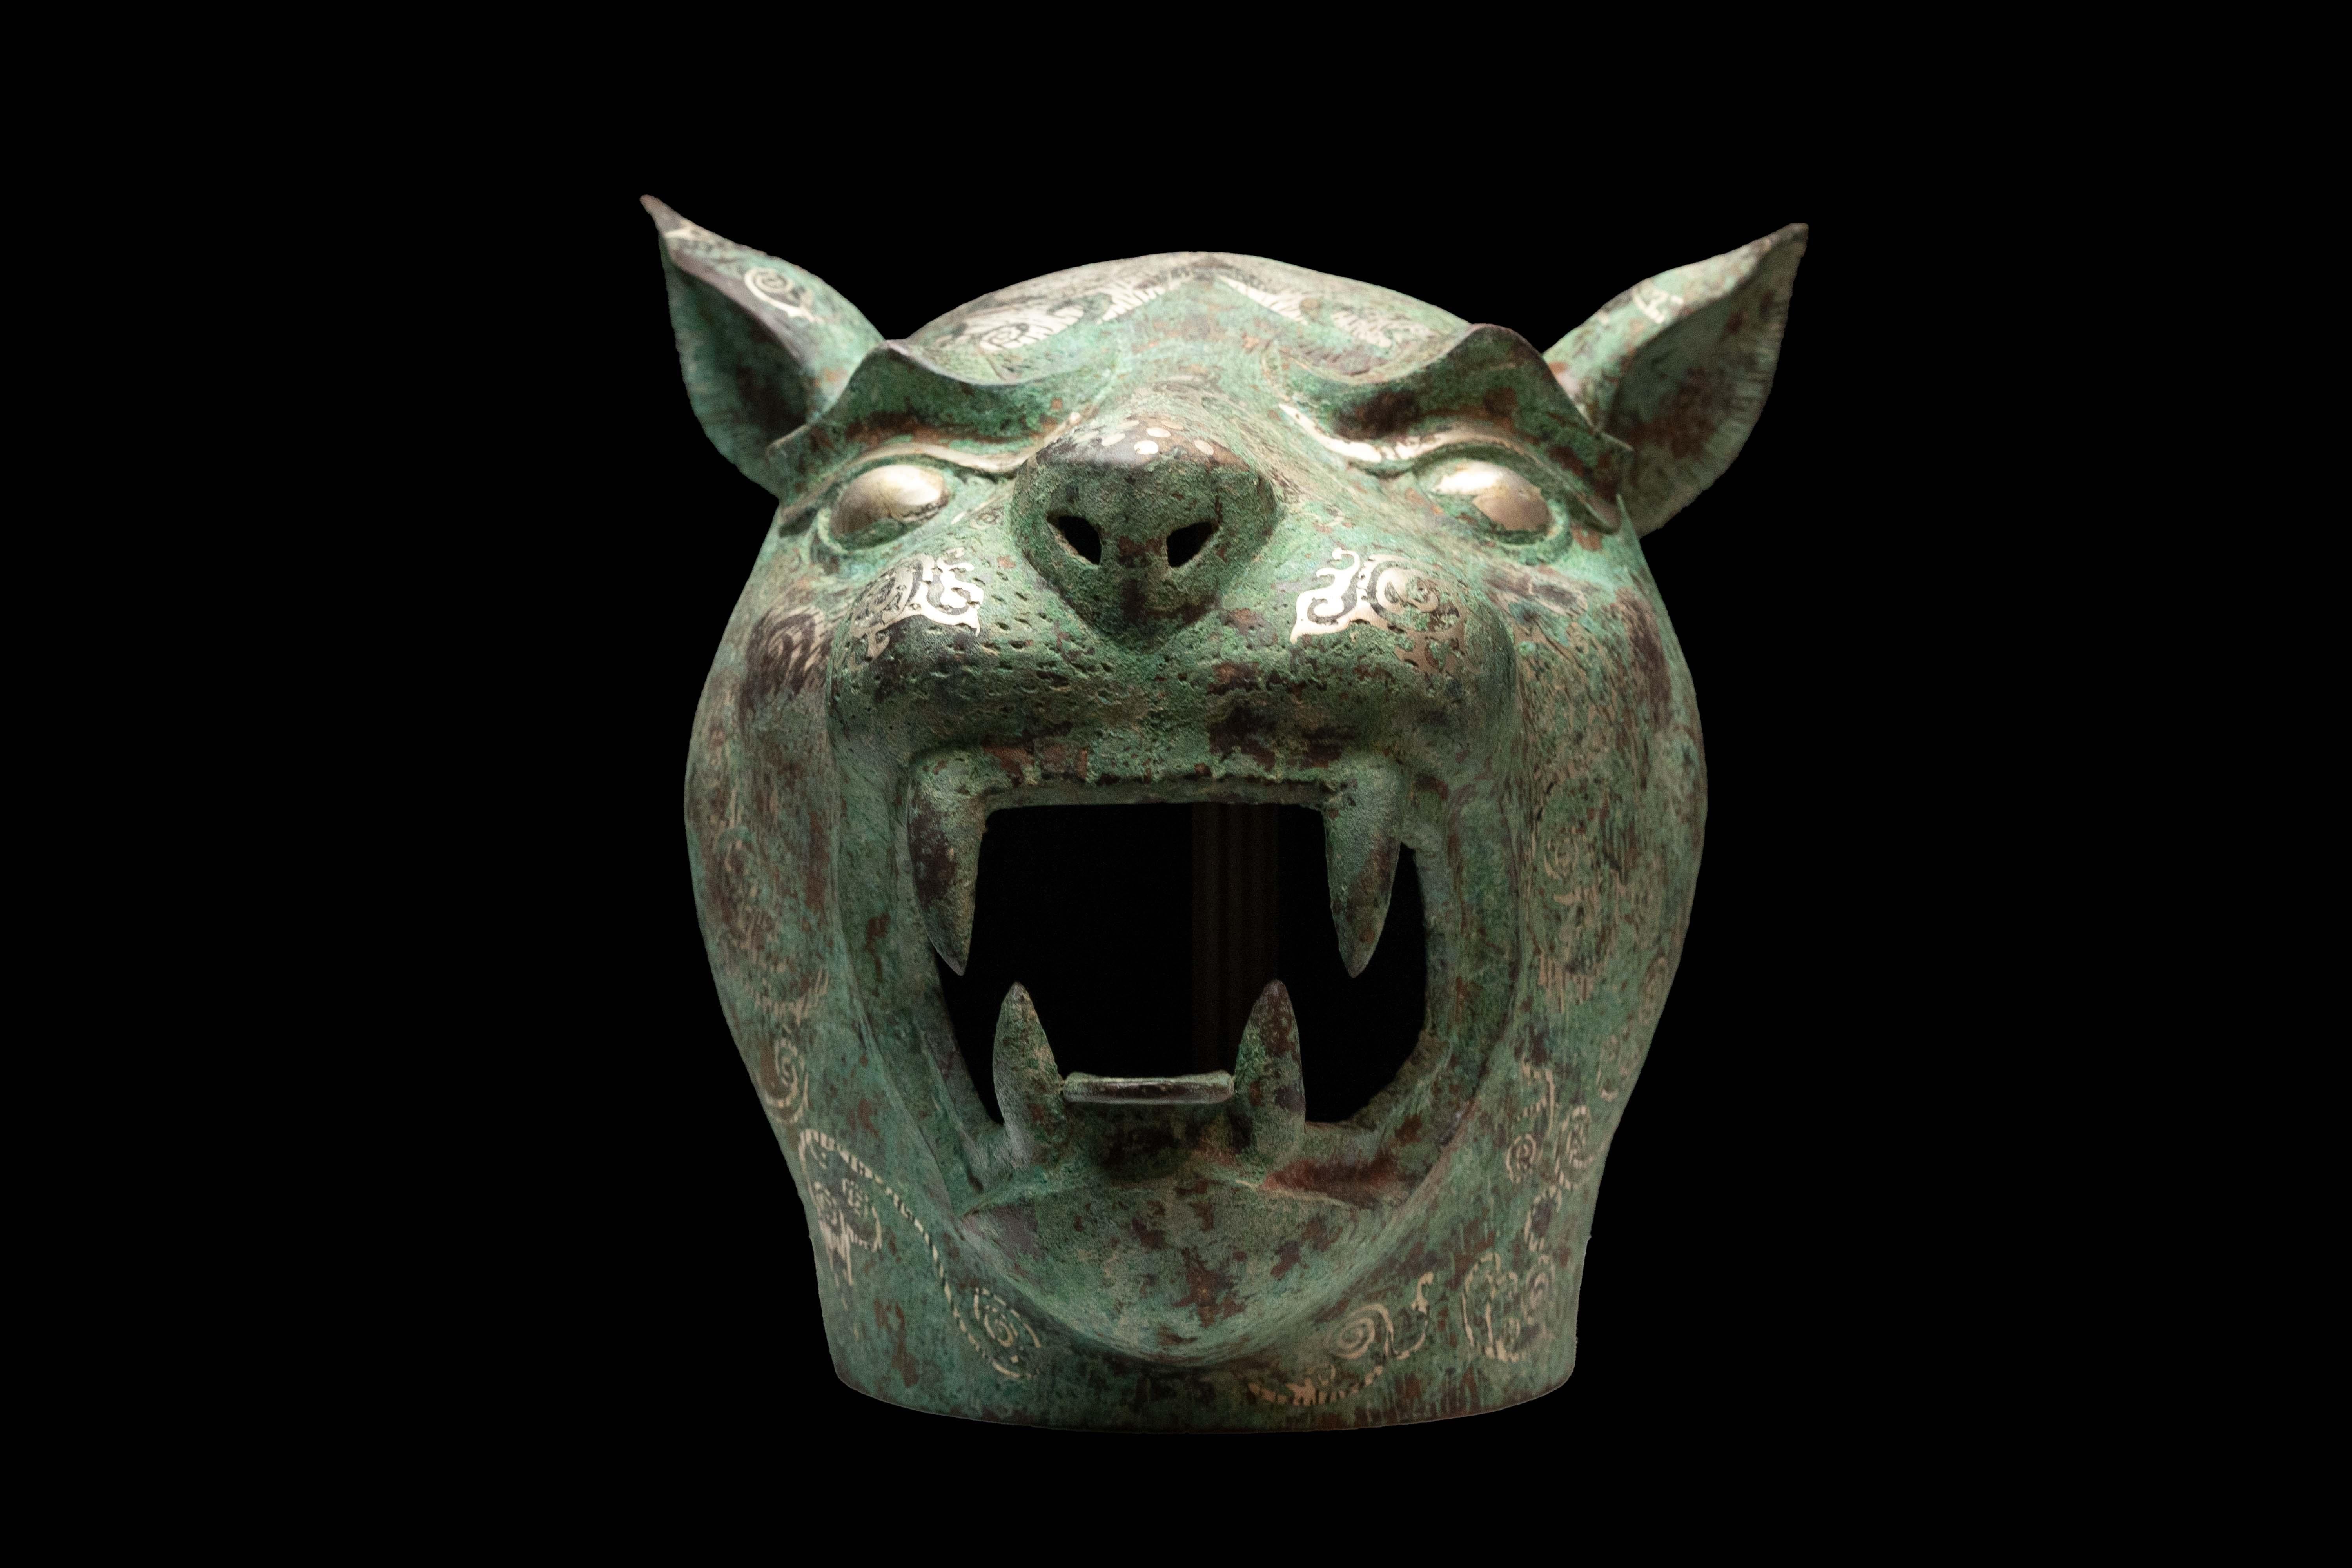 Chinese Zodiac tiger head

Measures: 10